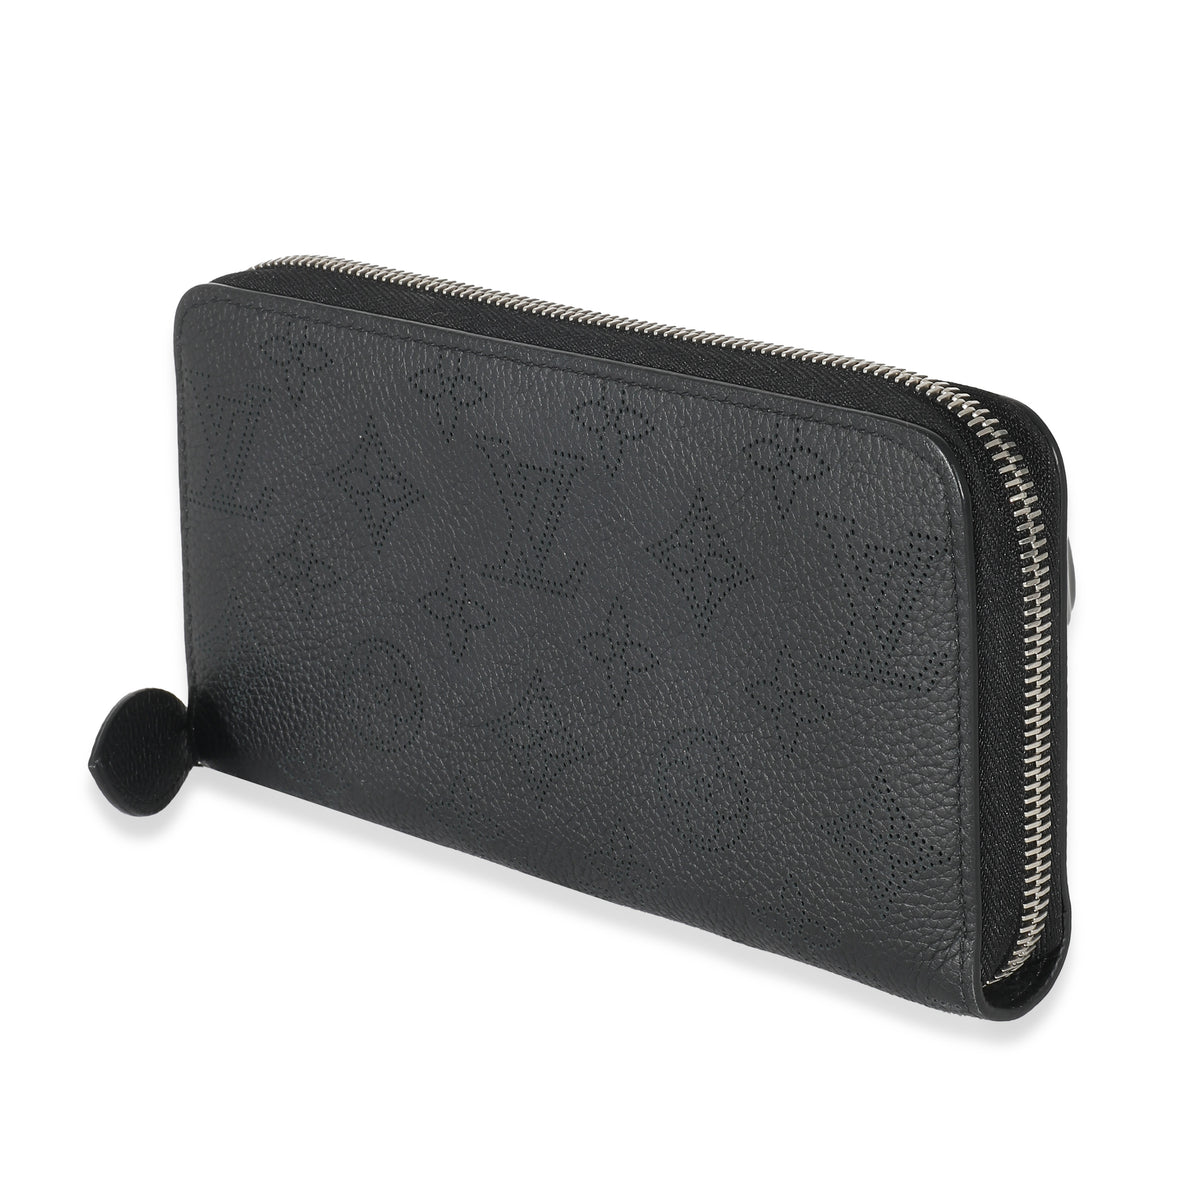 Zippy Wallet Mahina Leather - Wallets and Small Leather Goods